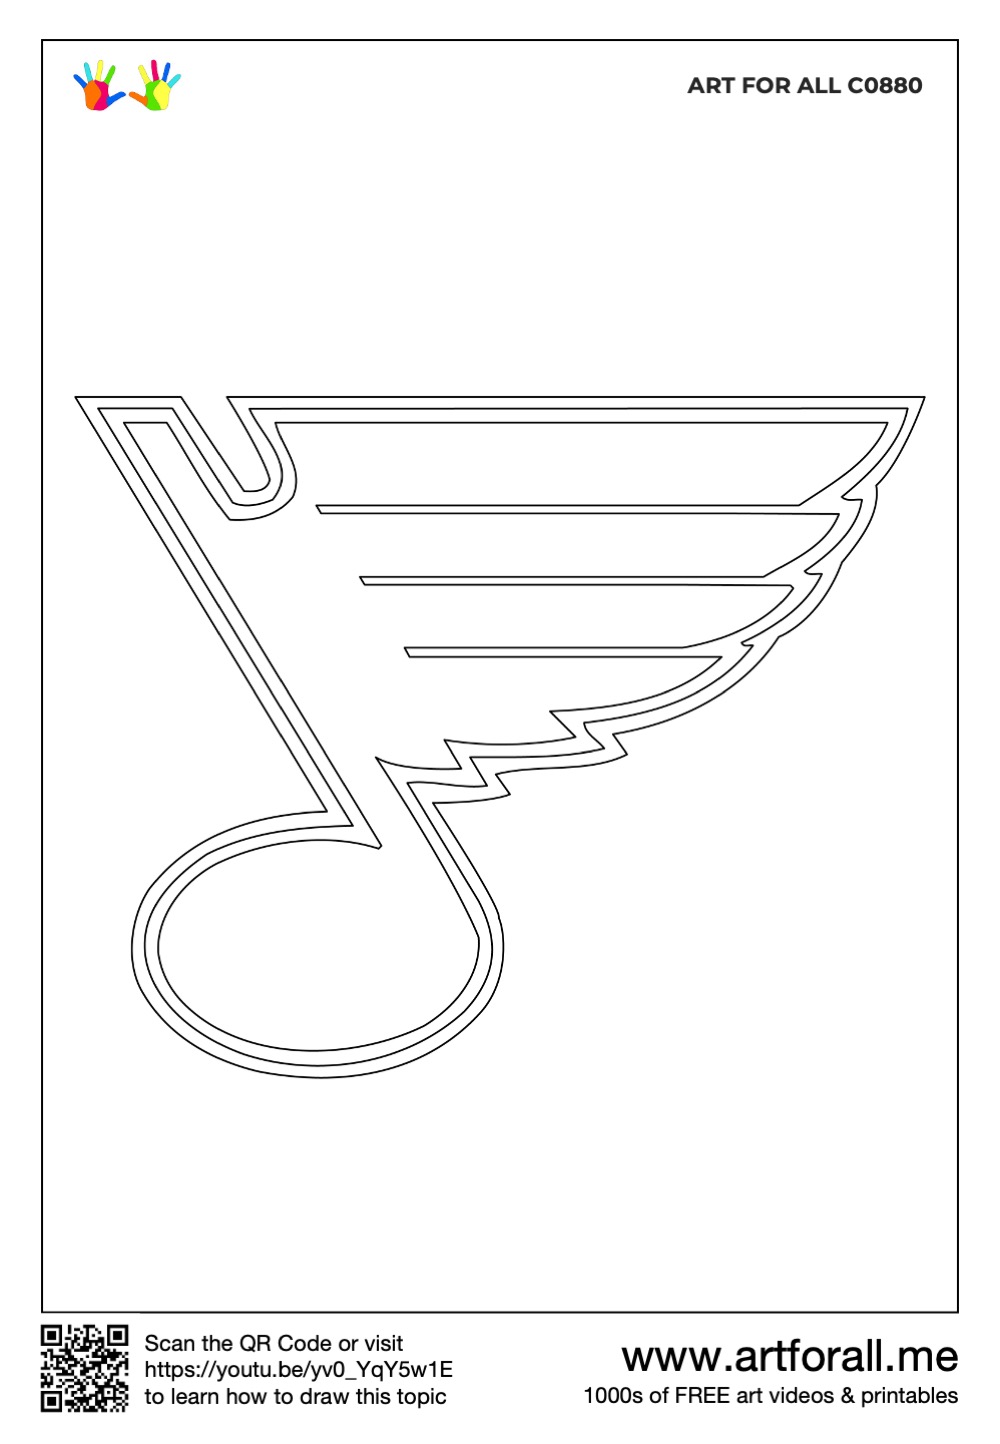 How to draw the st louis blues logo